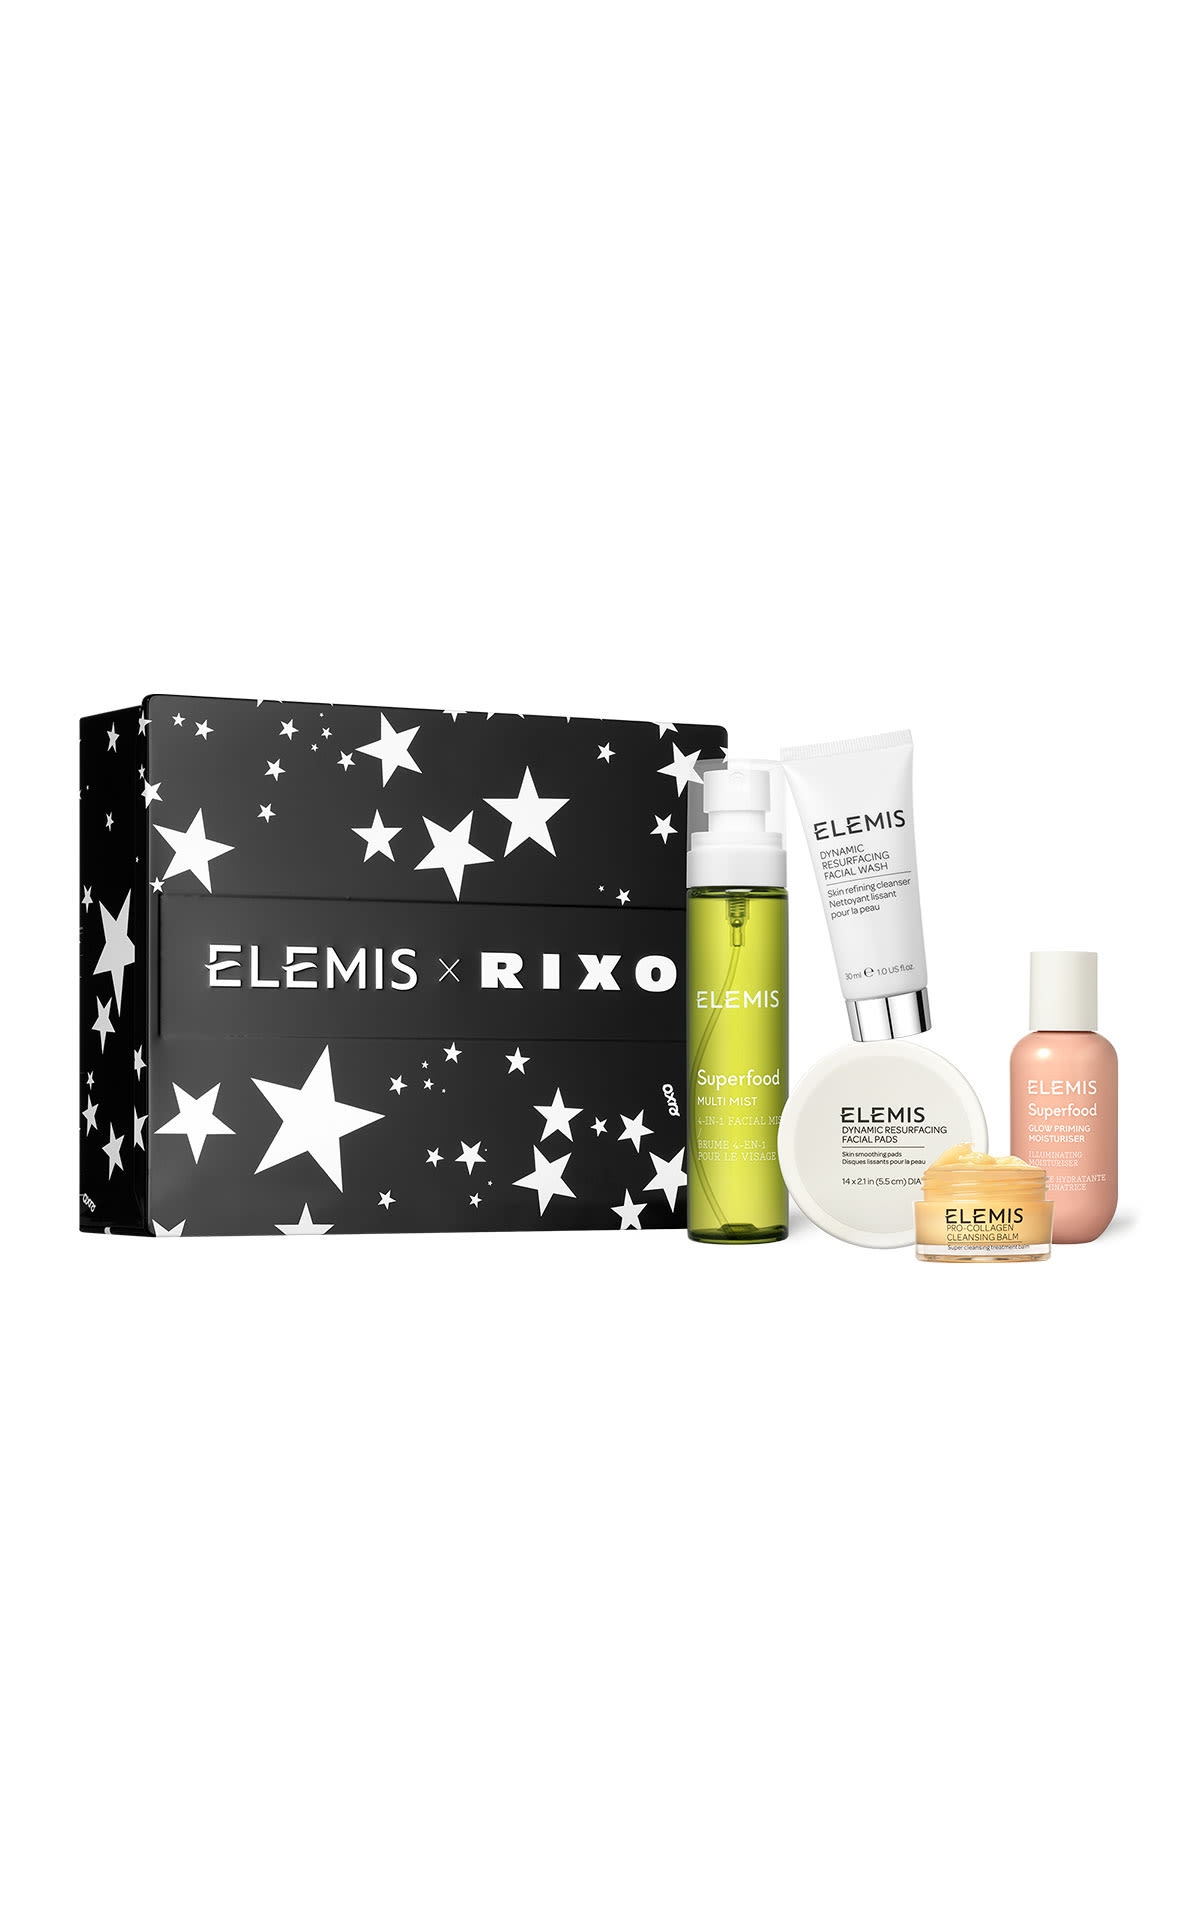 ELEMIS RIXO The story of glam and glow from Bicester Village